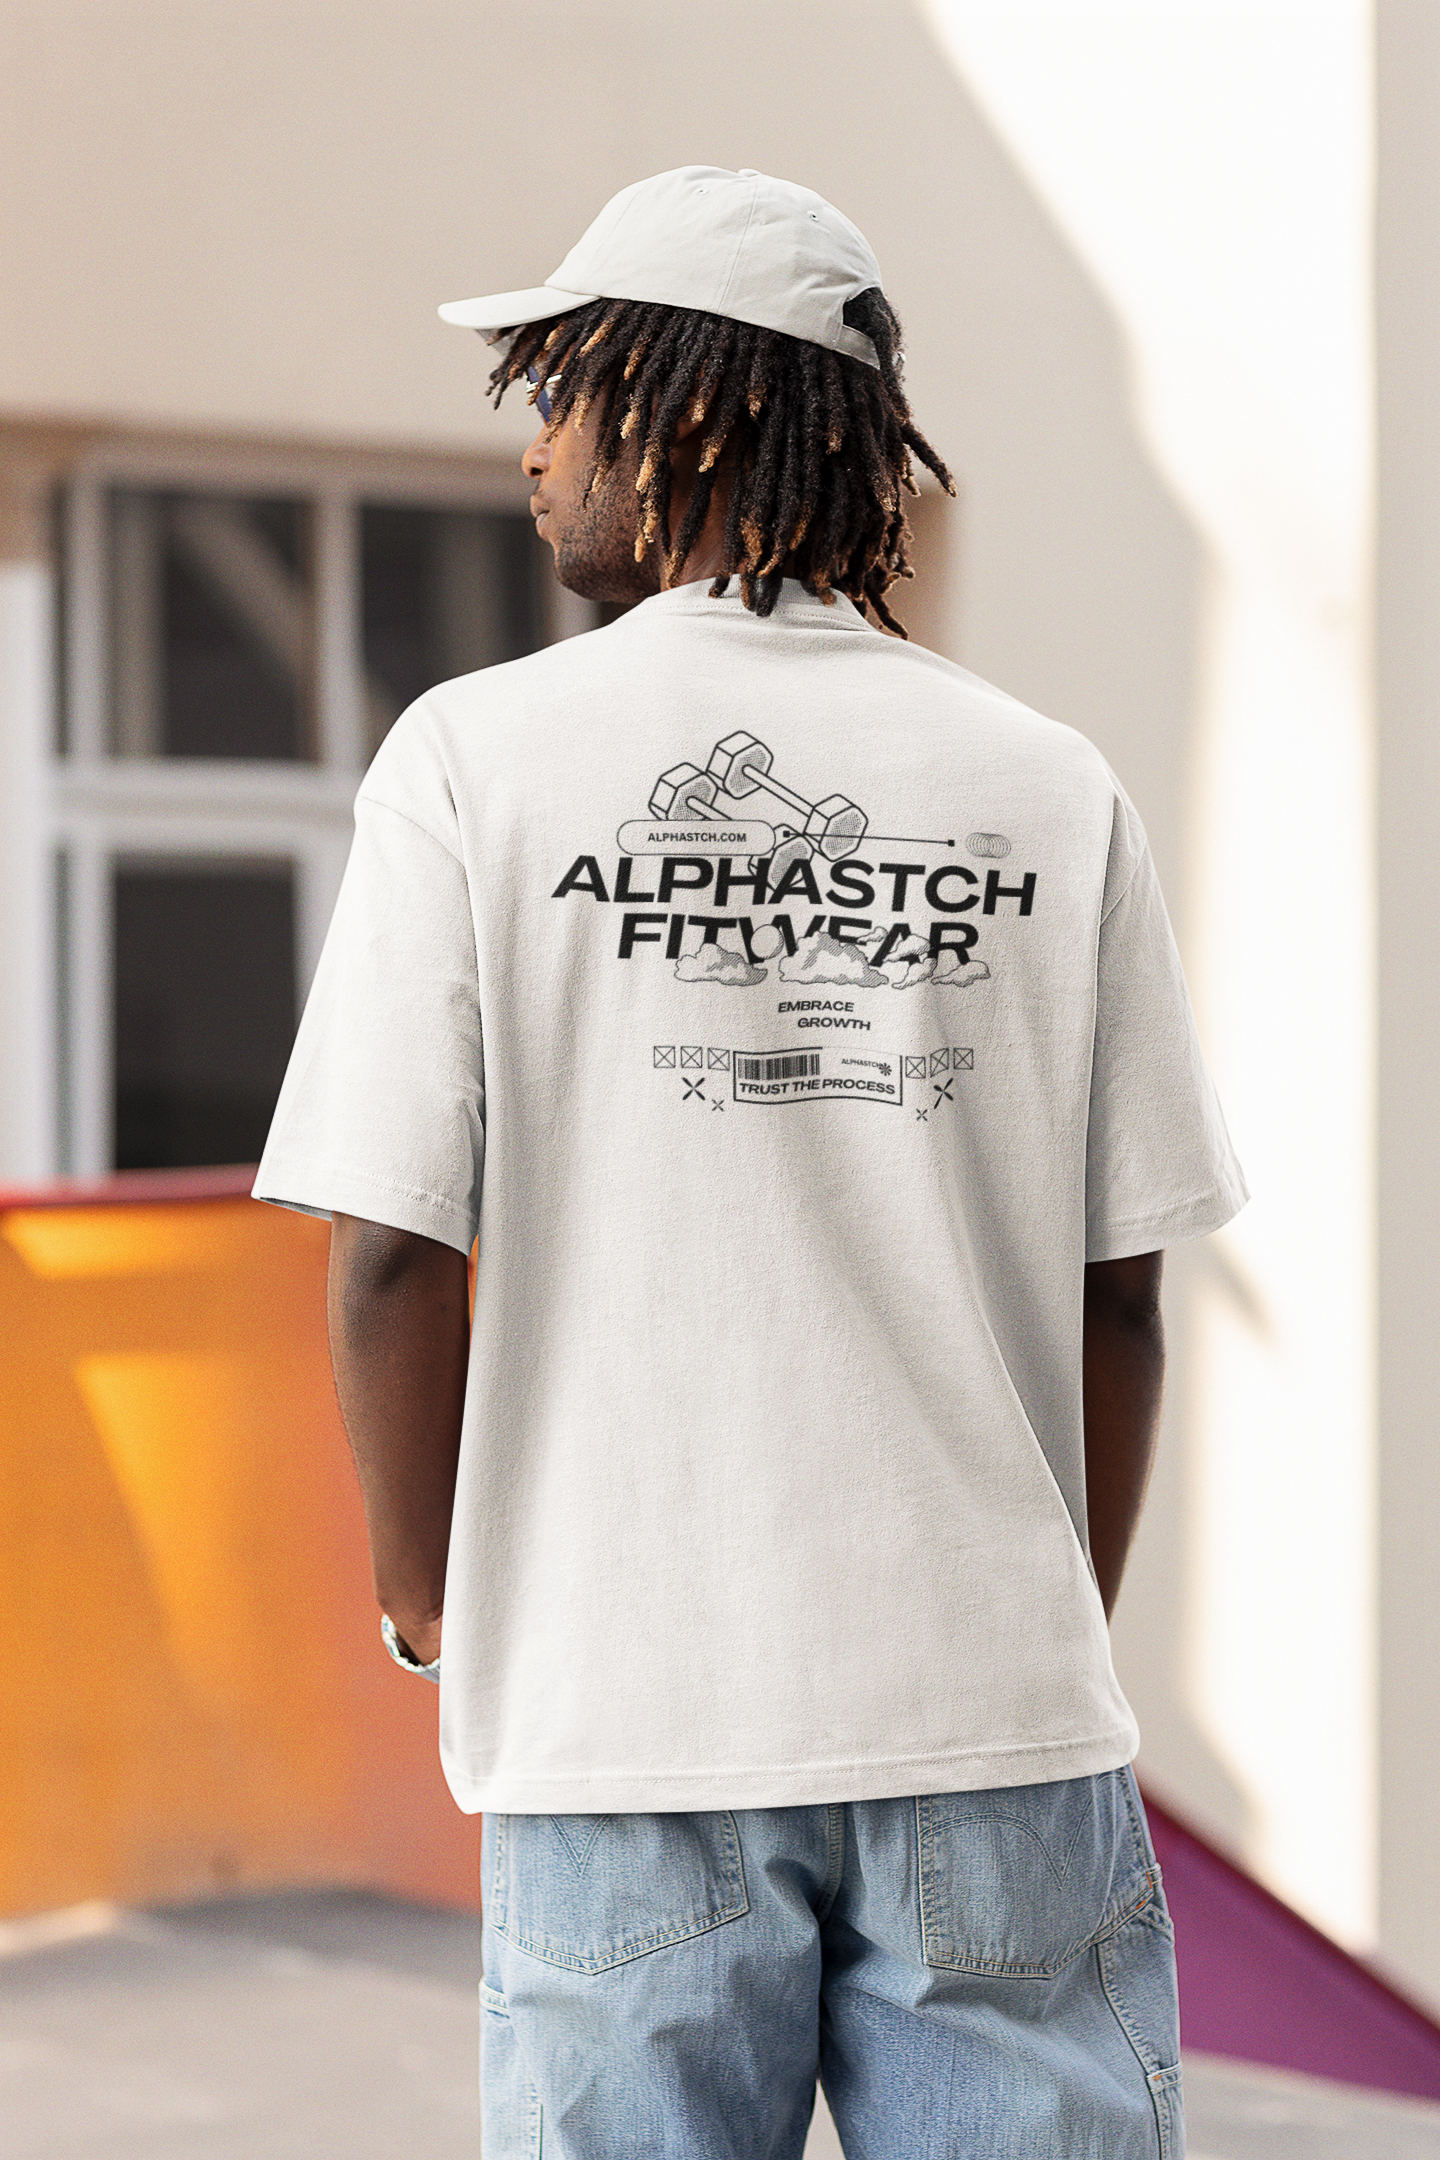 AlphaStch "Clouded" Graphic Tee